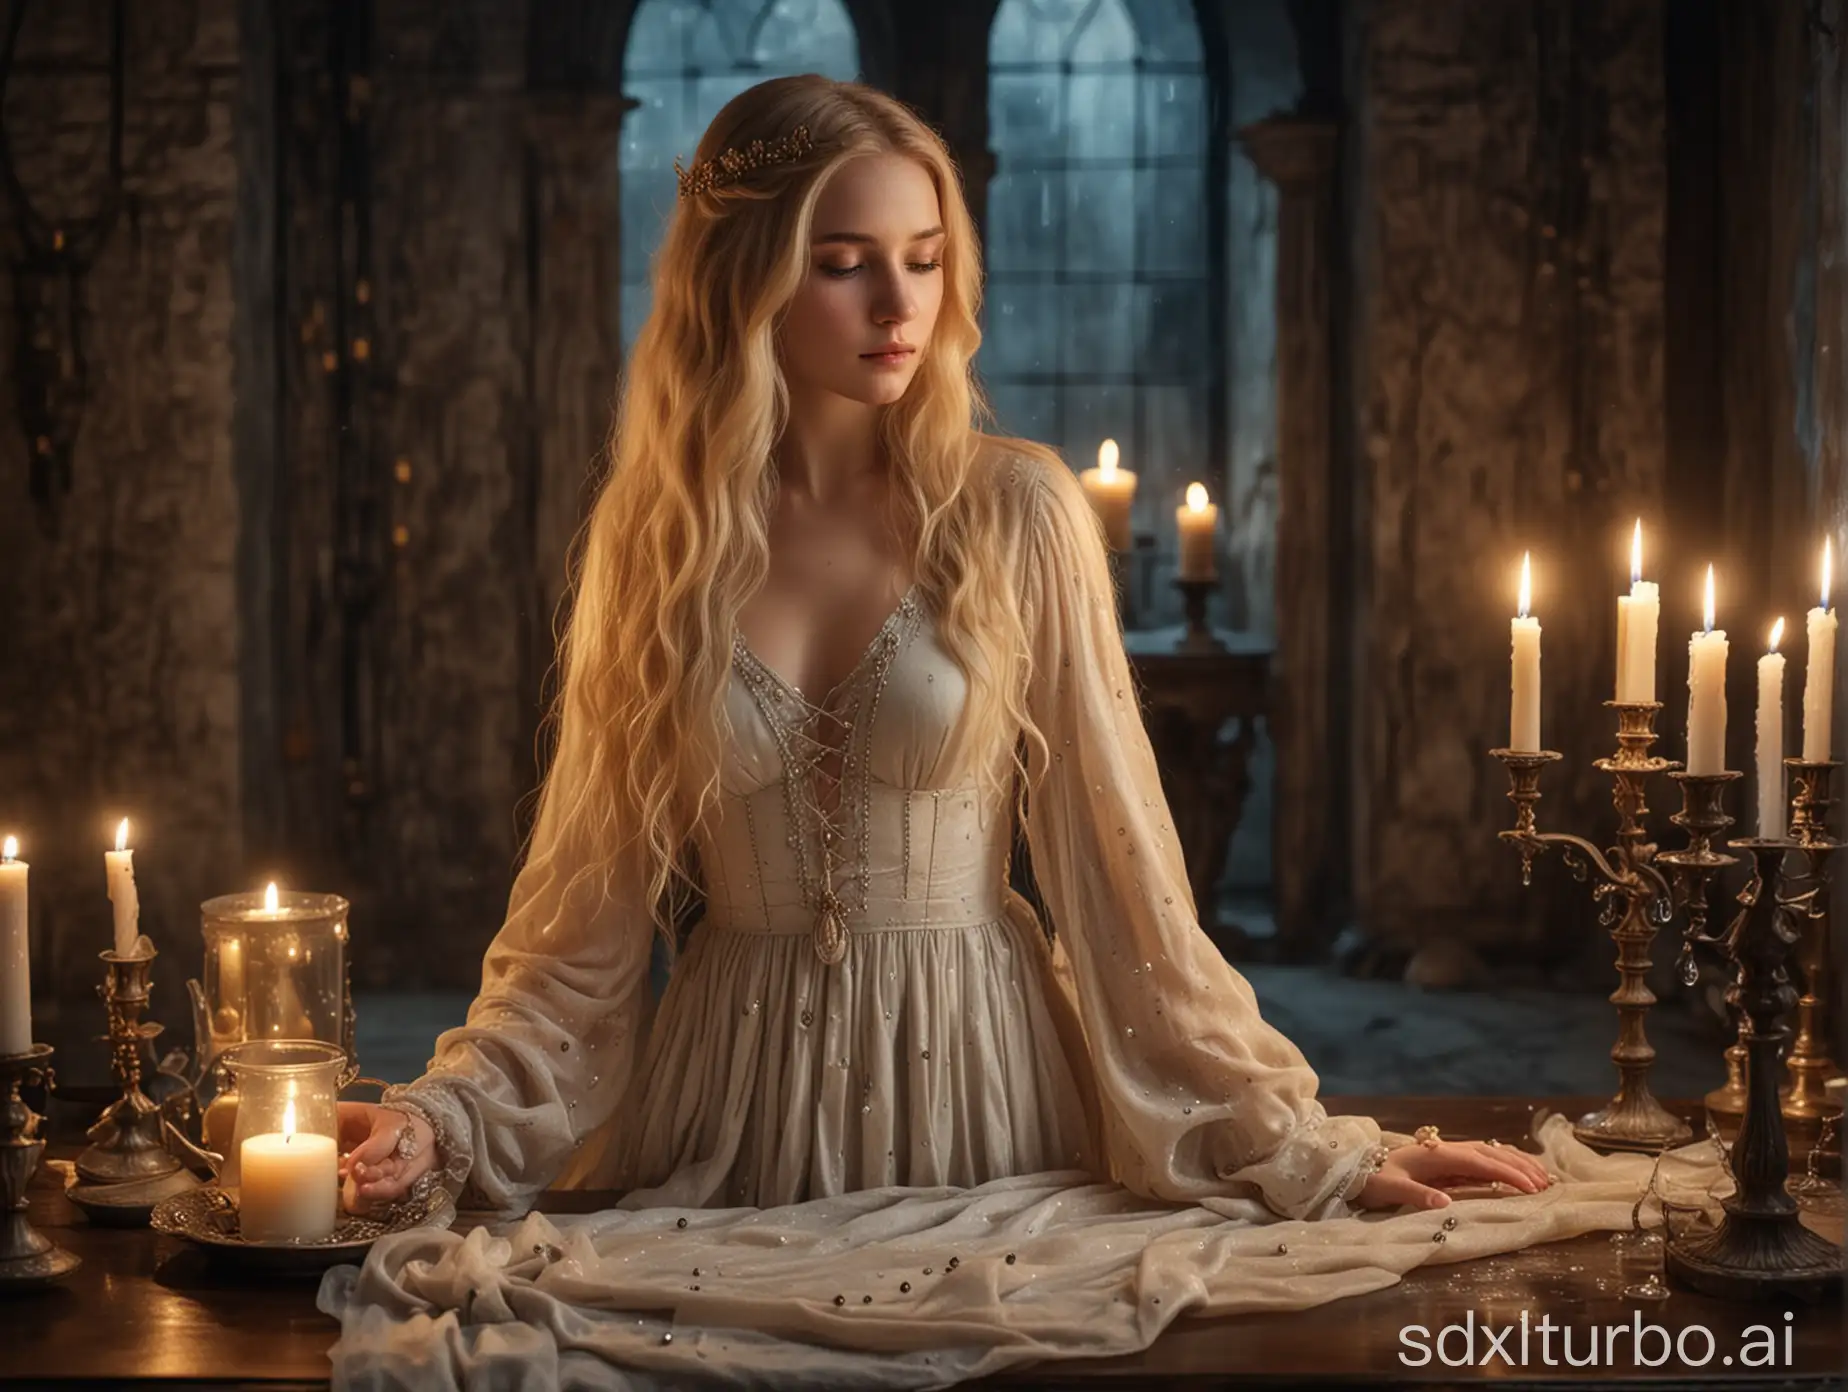 Mystical-Blonde-Maiden-Pouring-Water-in-Candlelit-Chamber